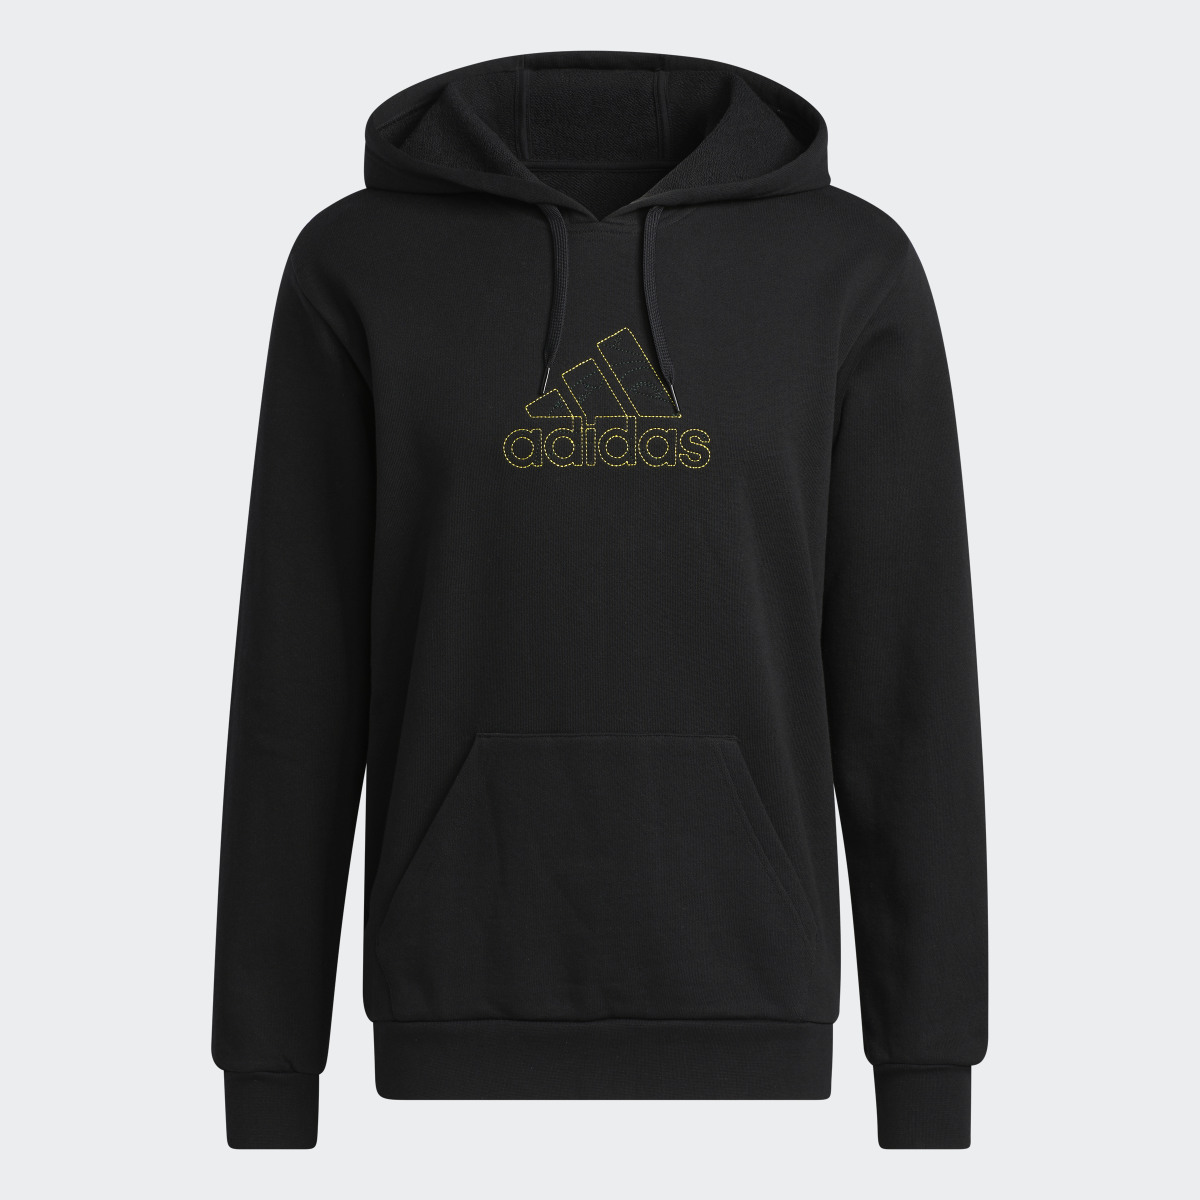 Adidas Embroidery Graphic Hoodie. 5